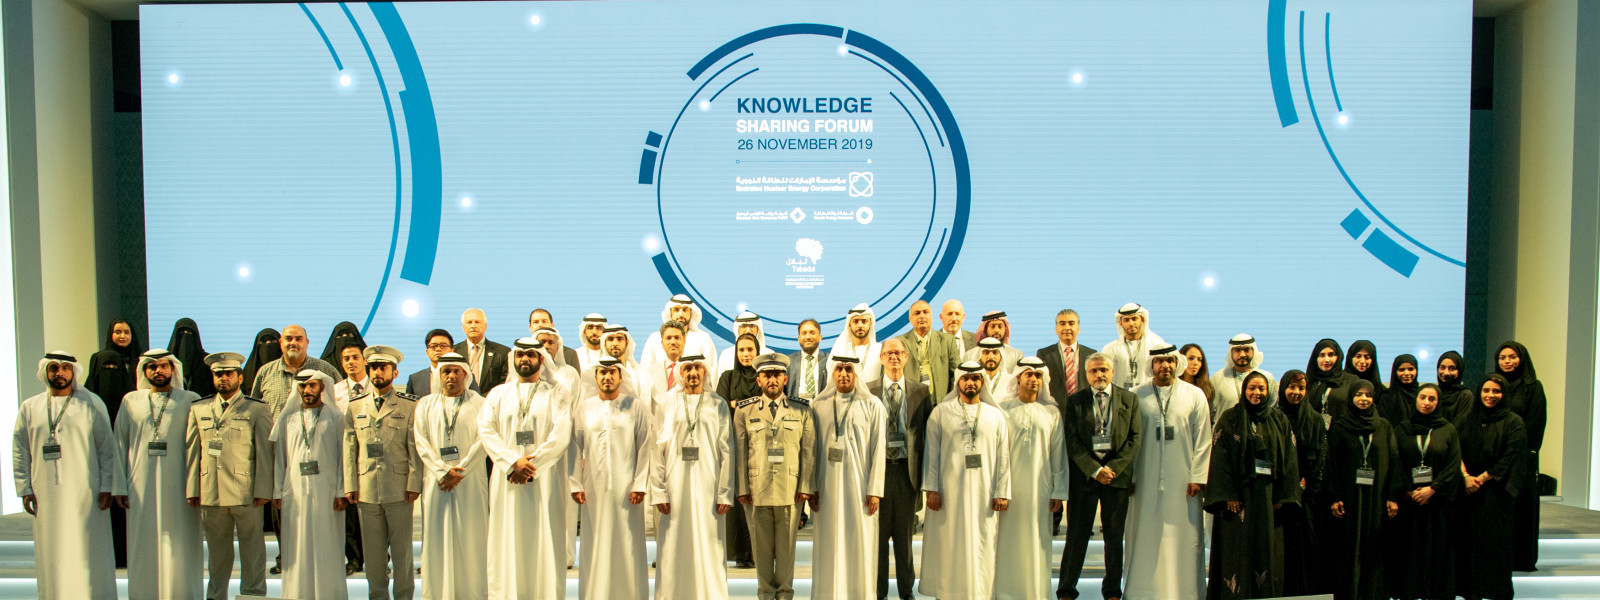 enec-hosts-knowledge-sharing-forum-on-business-continuty-management-5dee351c2481b.jpg (Gallery Image)